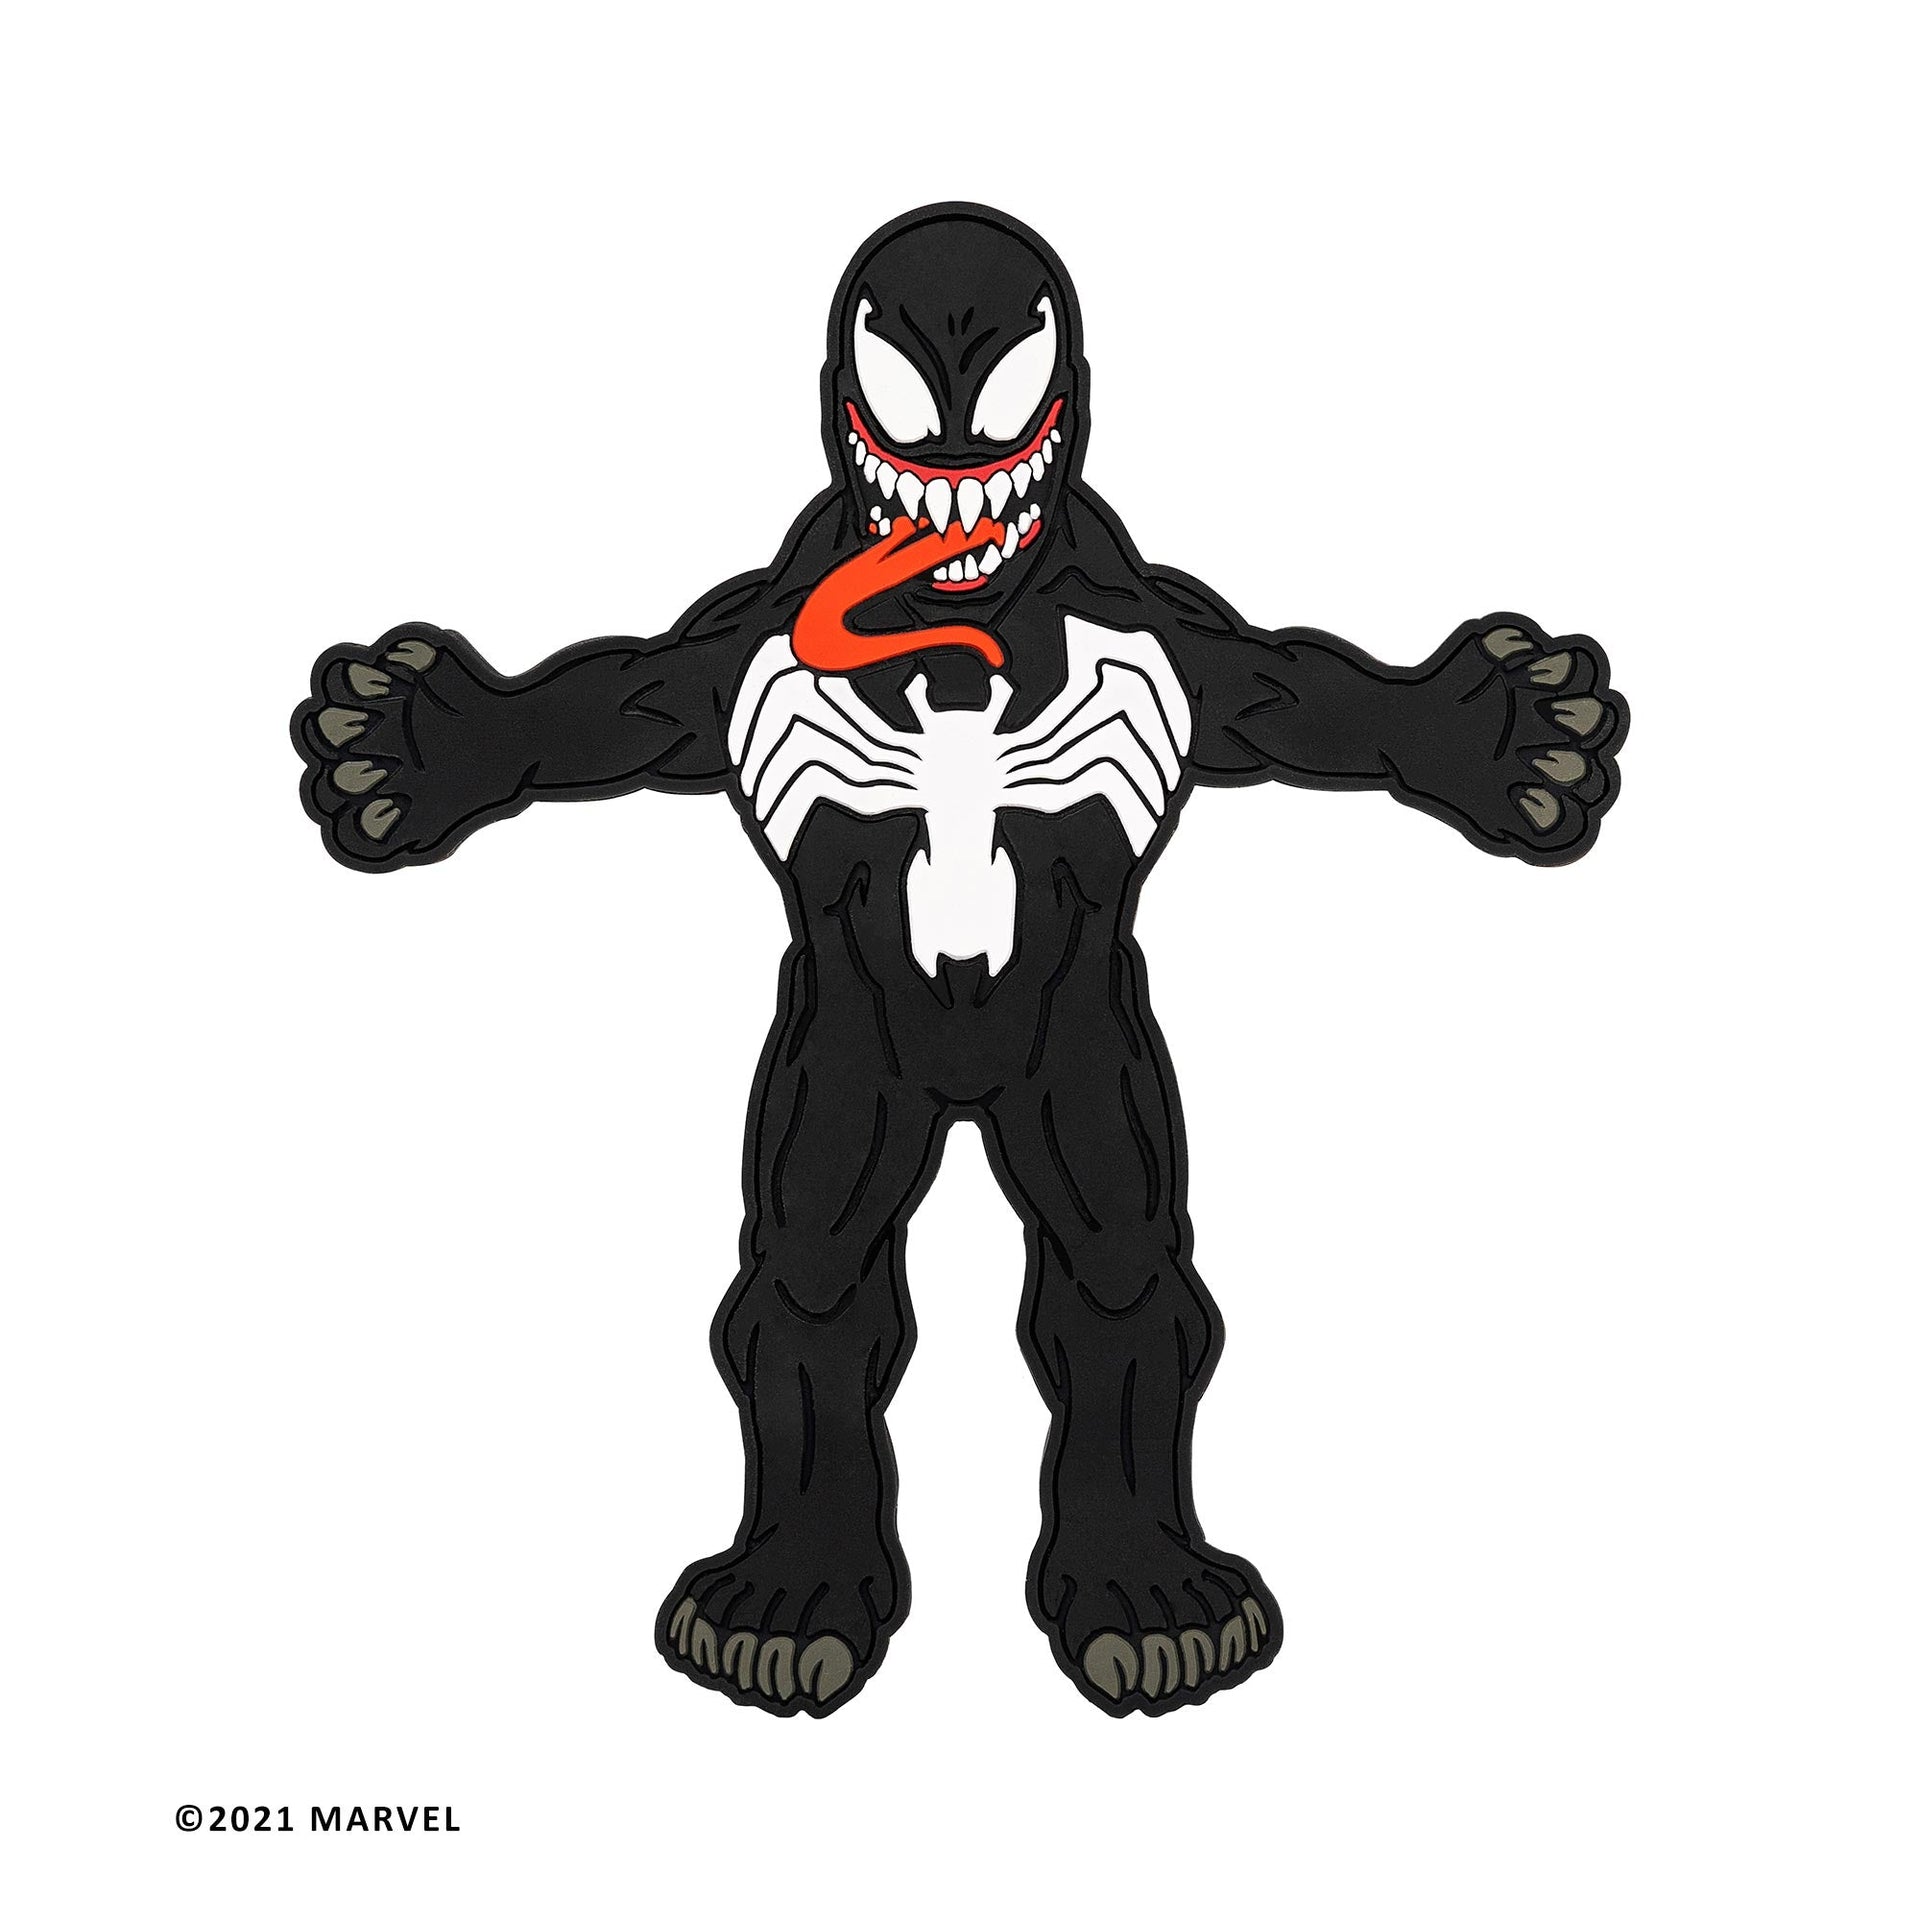 Image of Marvel Comics Venom Hug Buddy on a white background with arms and legs in the open position